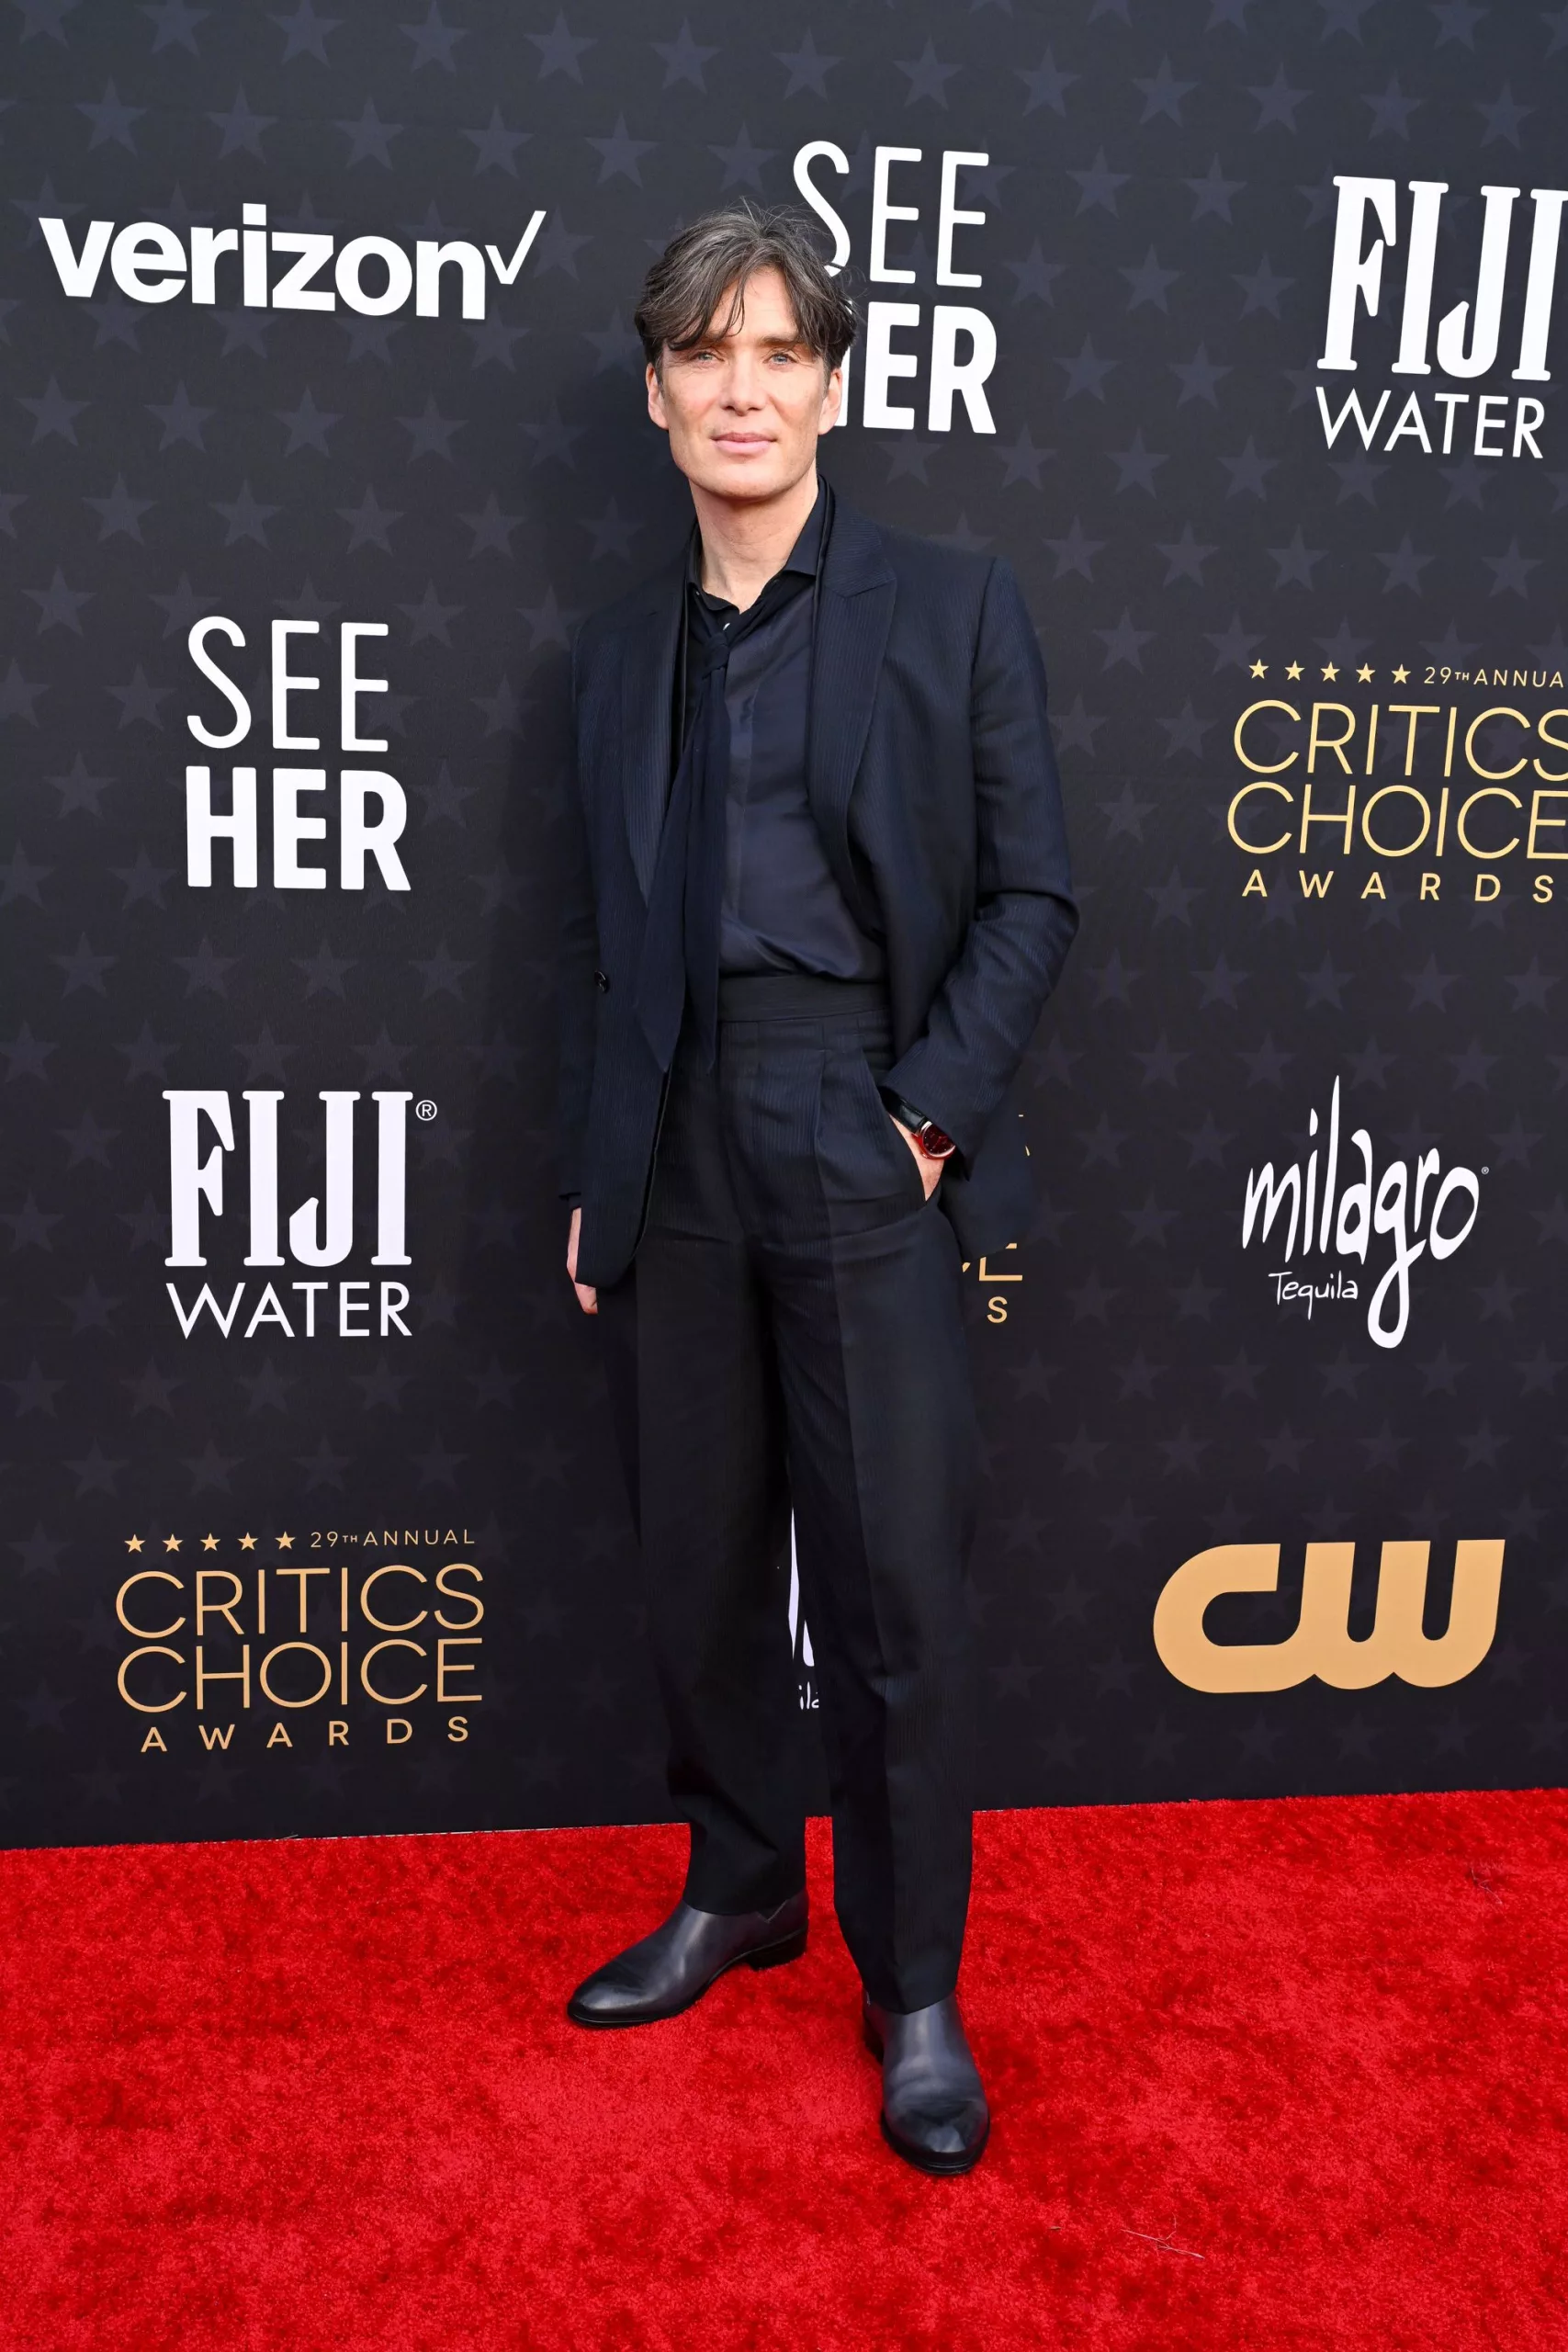 Cillian Murphy, nominated for “Oppenheimer,” went for a navy three-piece suit and loosely fitted tie.